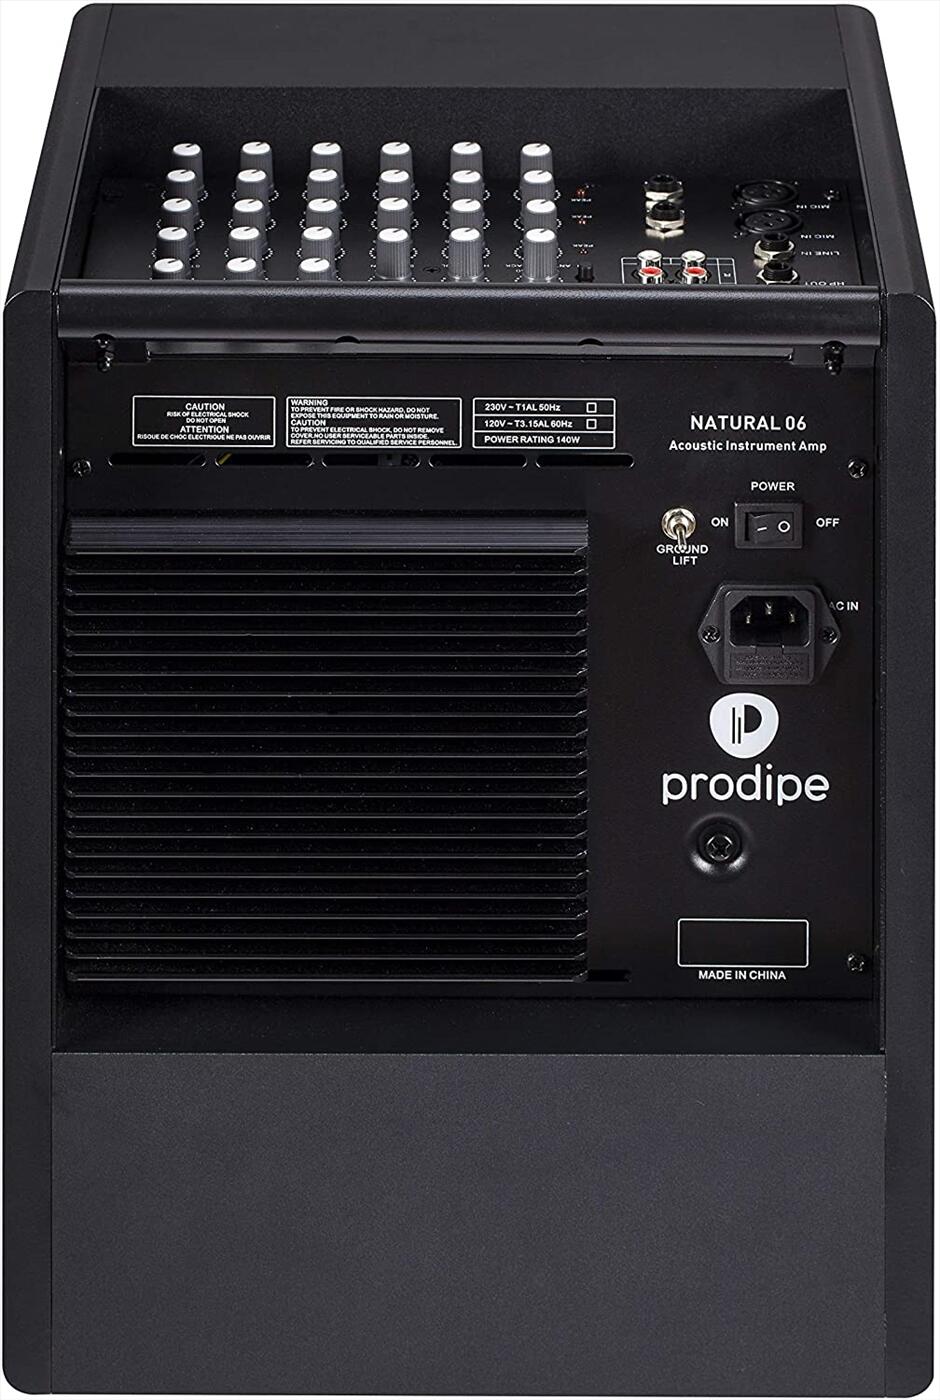 Prodipe PERSONAL 6 Acoustic Instrument Amp